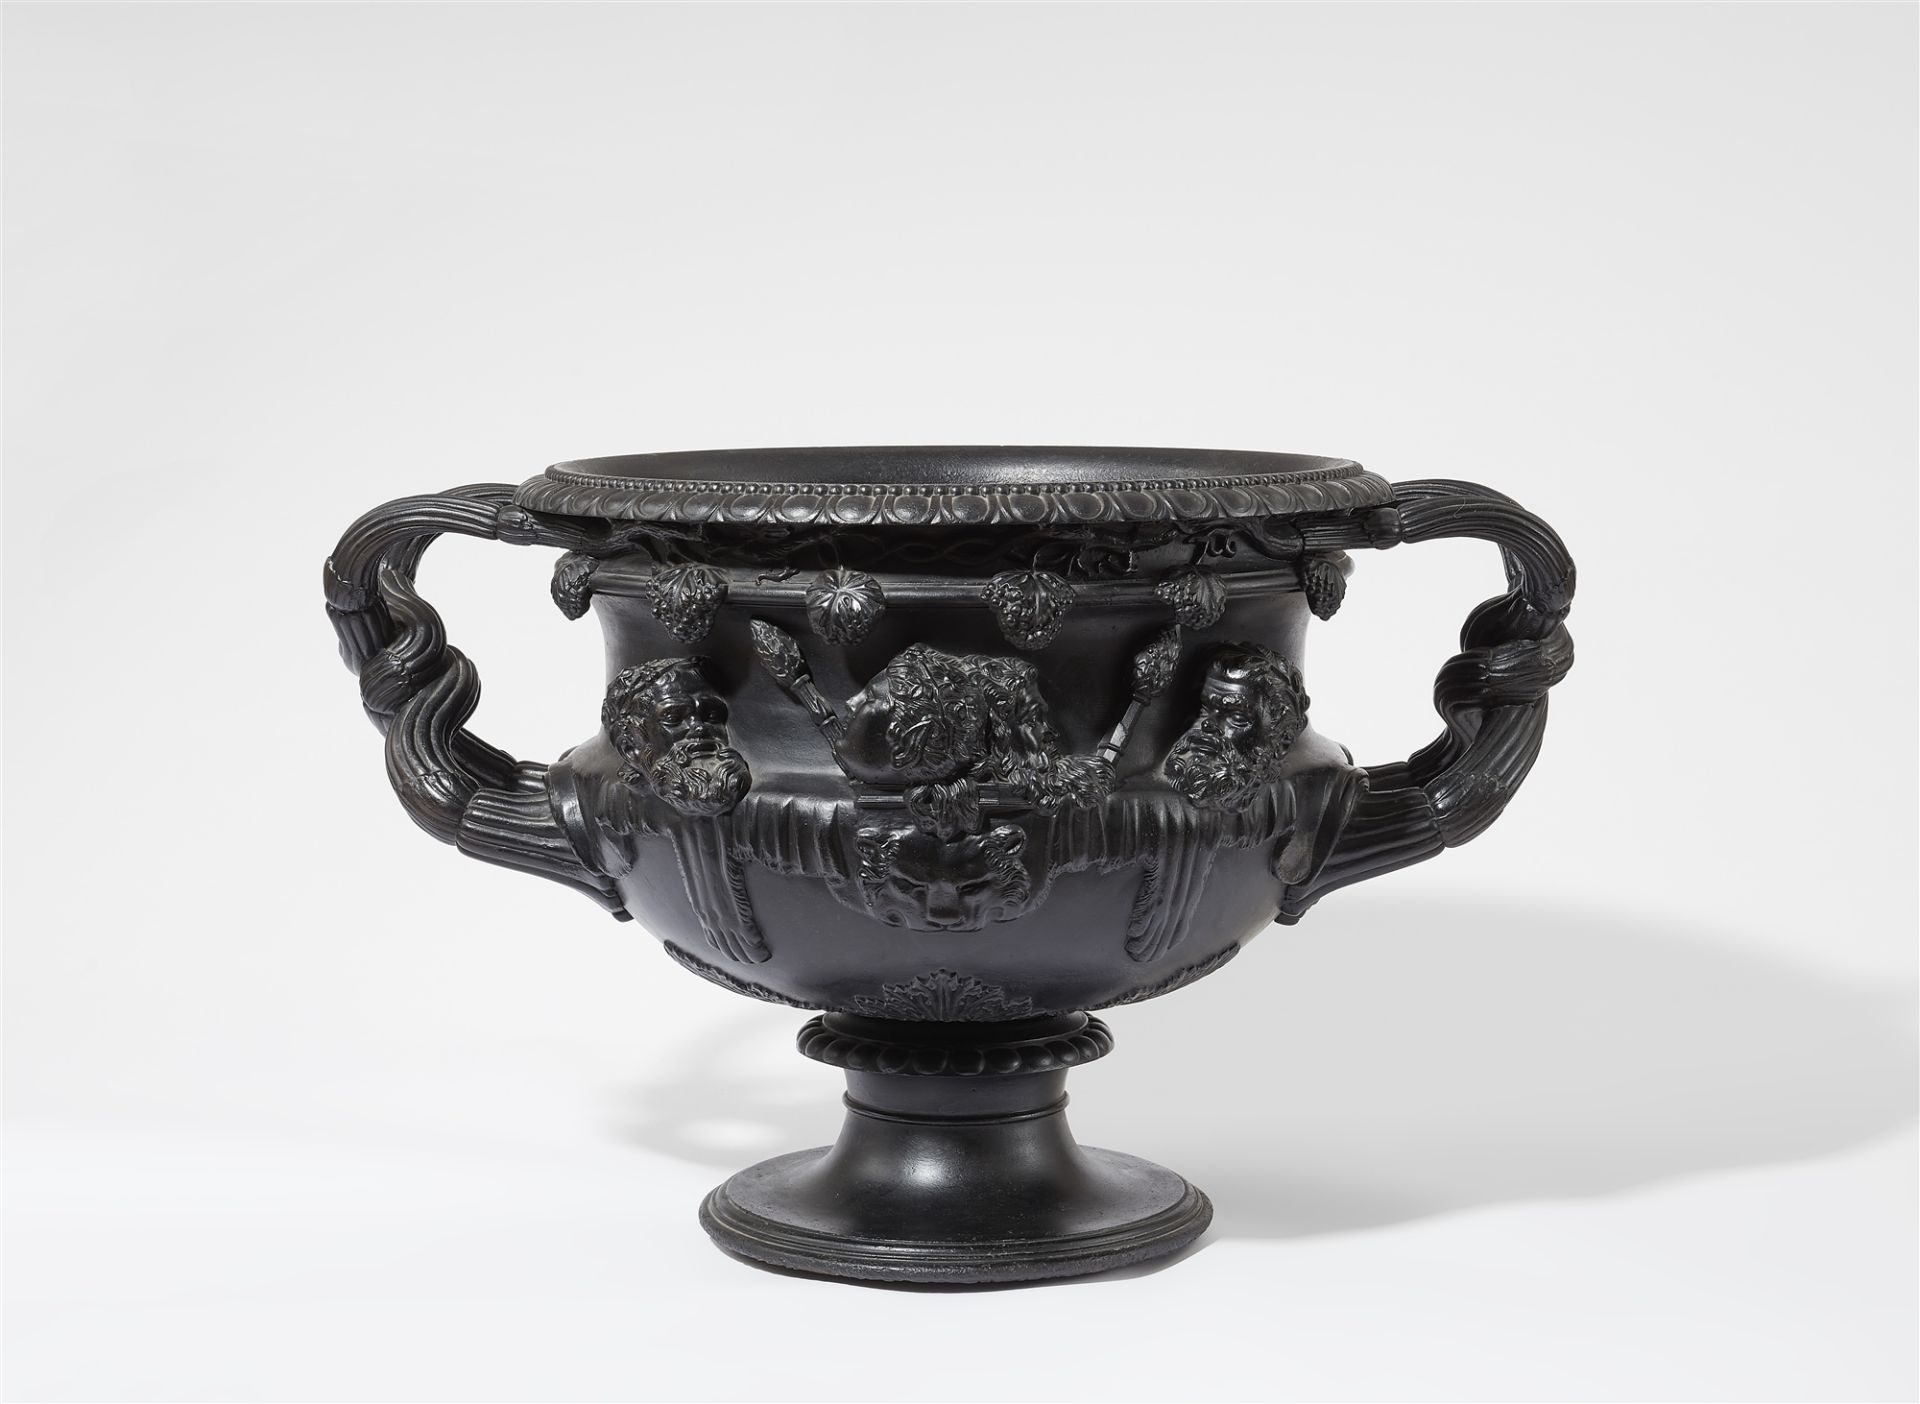 A cast iron model of the Warwick vase